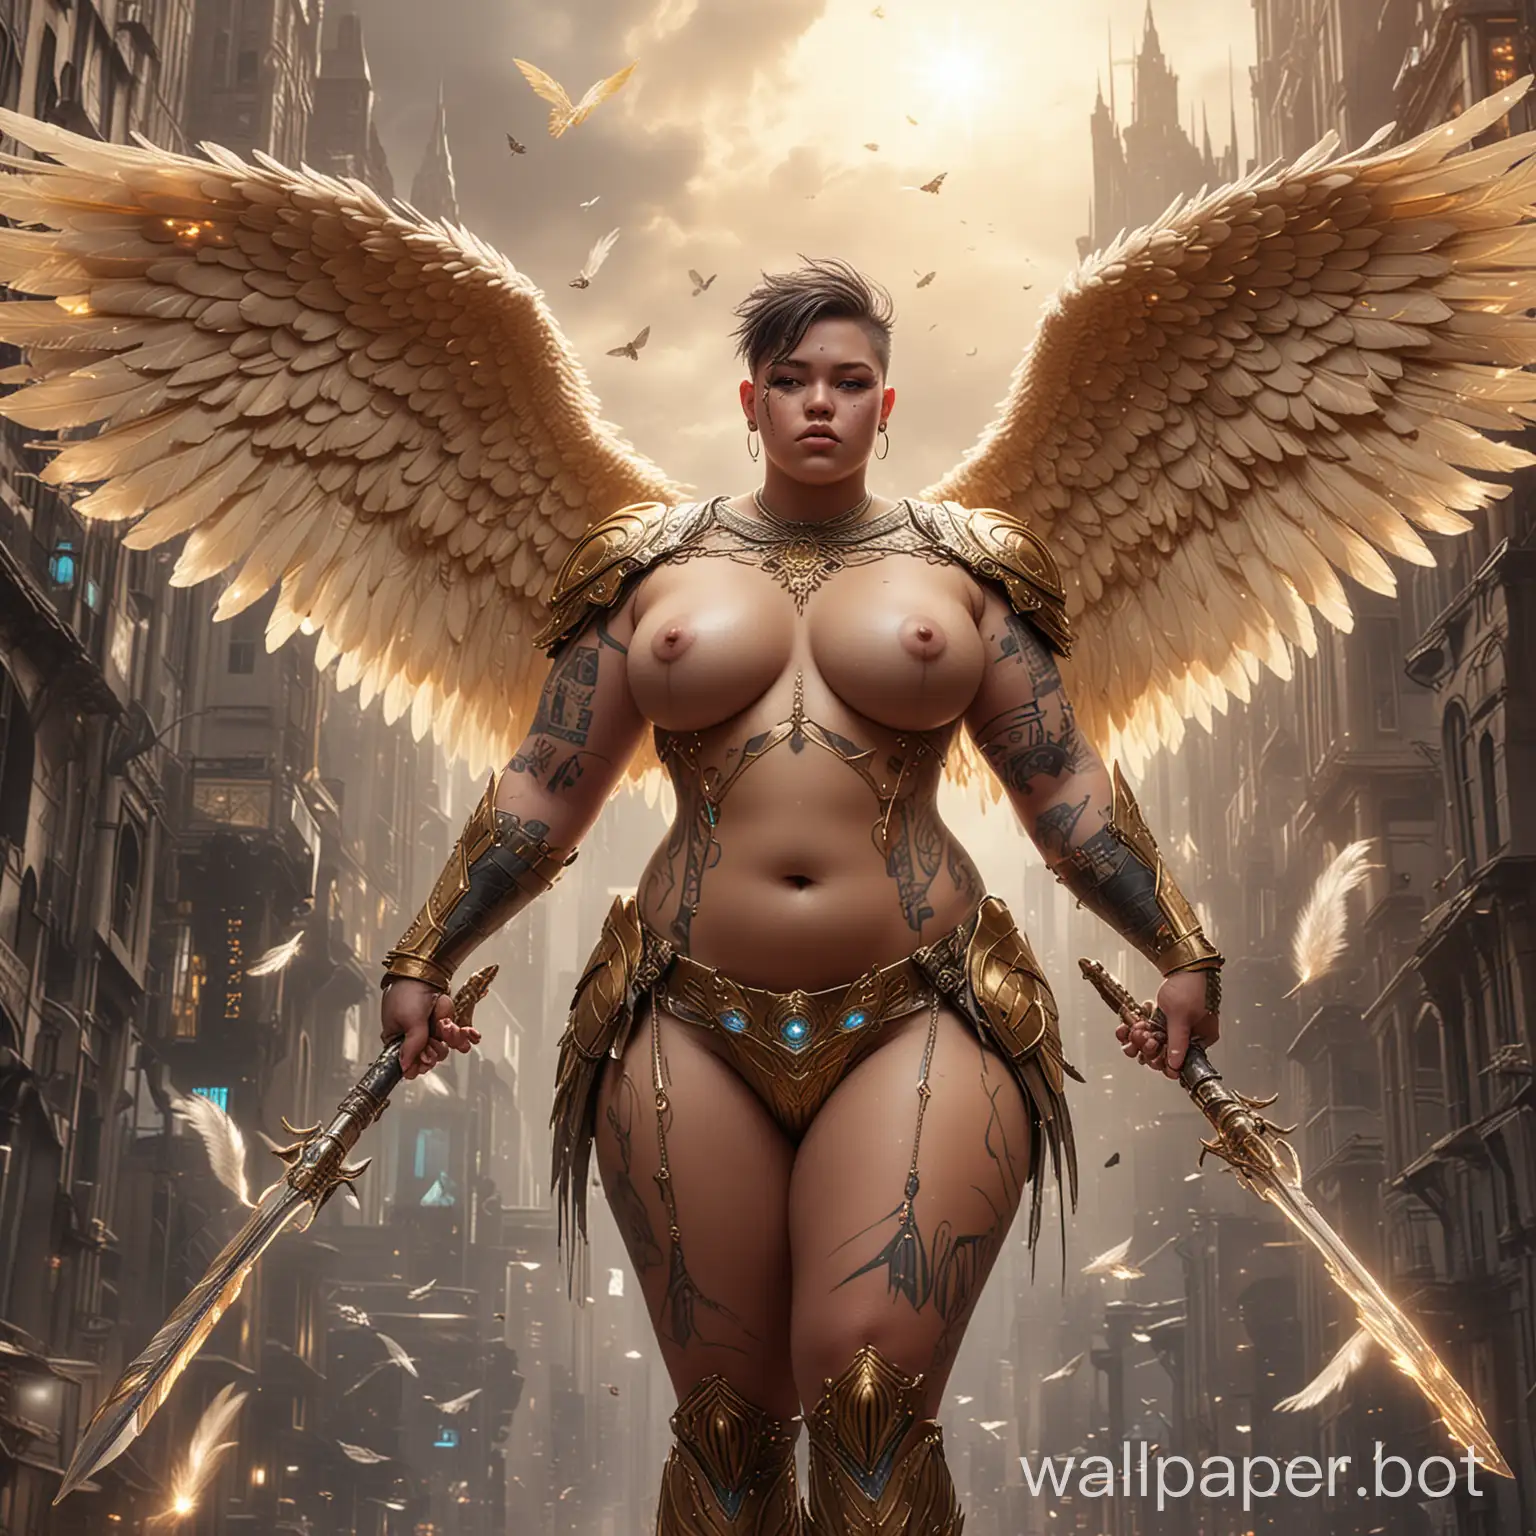 SciFi-Future-Fat-Tattooed-Warrior-Angel-Boy-with-Iridescent-Wings-and-Magical-Staff